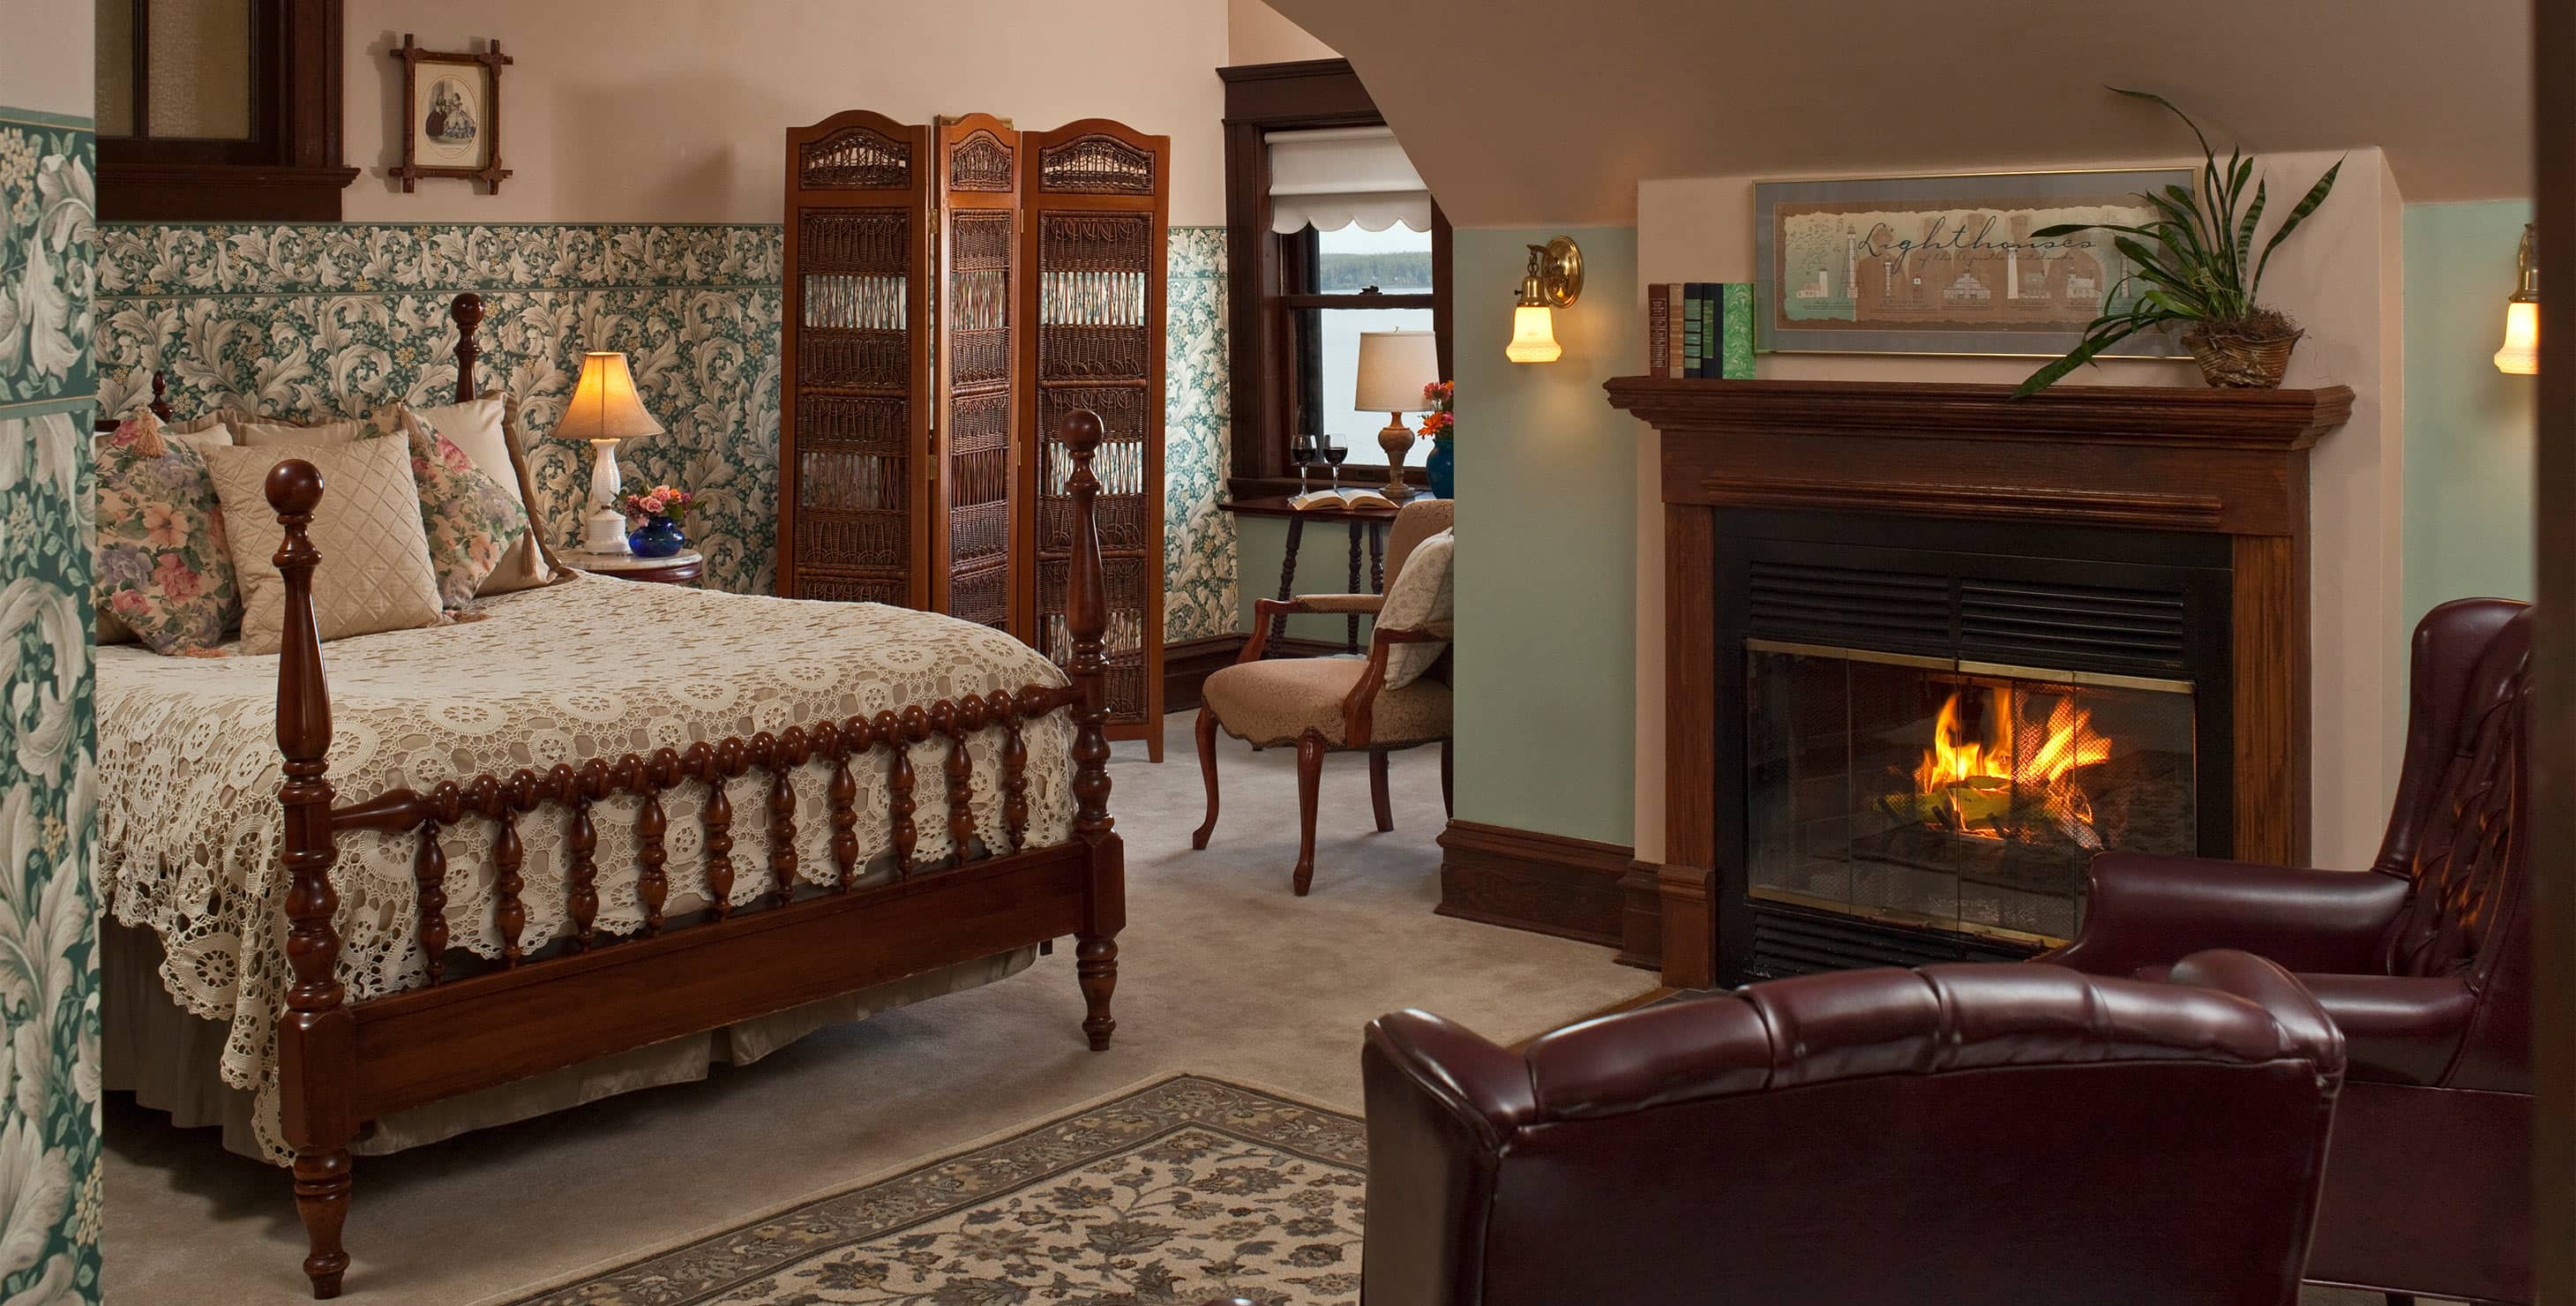 Bed, Fireplace, and Chairs in South room